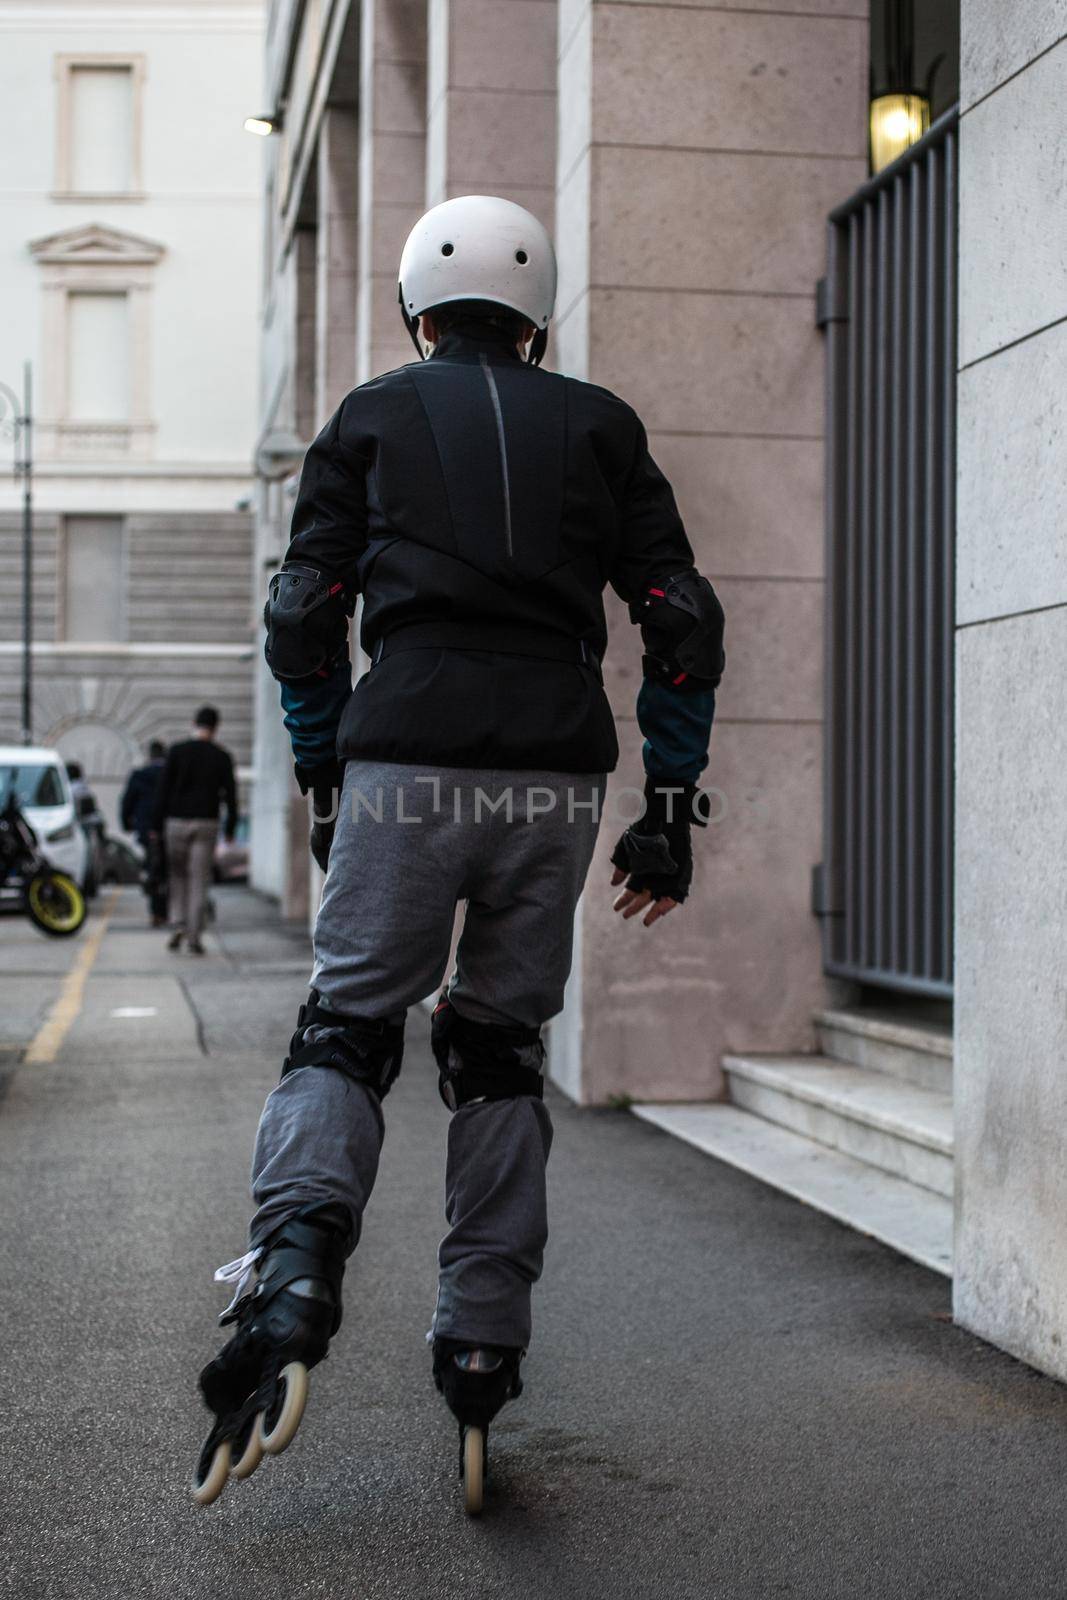 A man wearing helmet and knee pads on roller skates riding outdoors on urban street by bepsimage